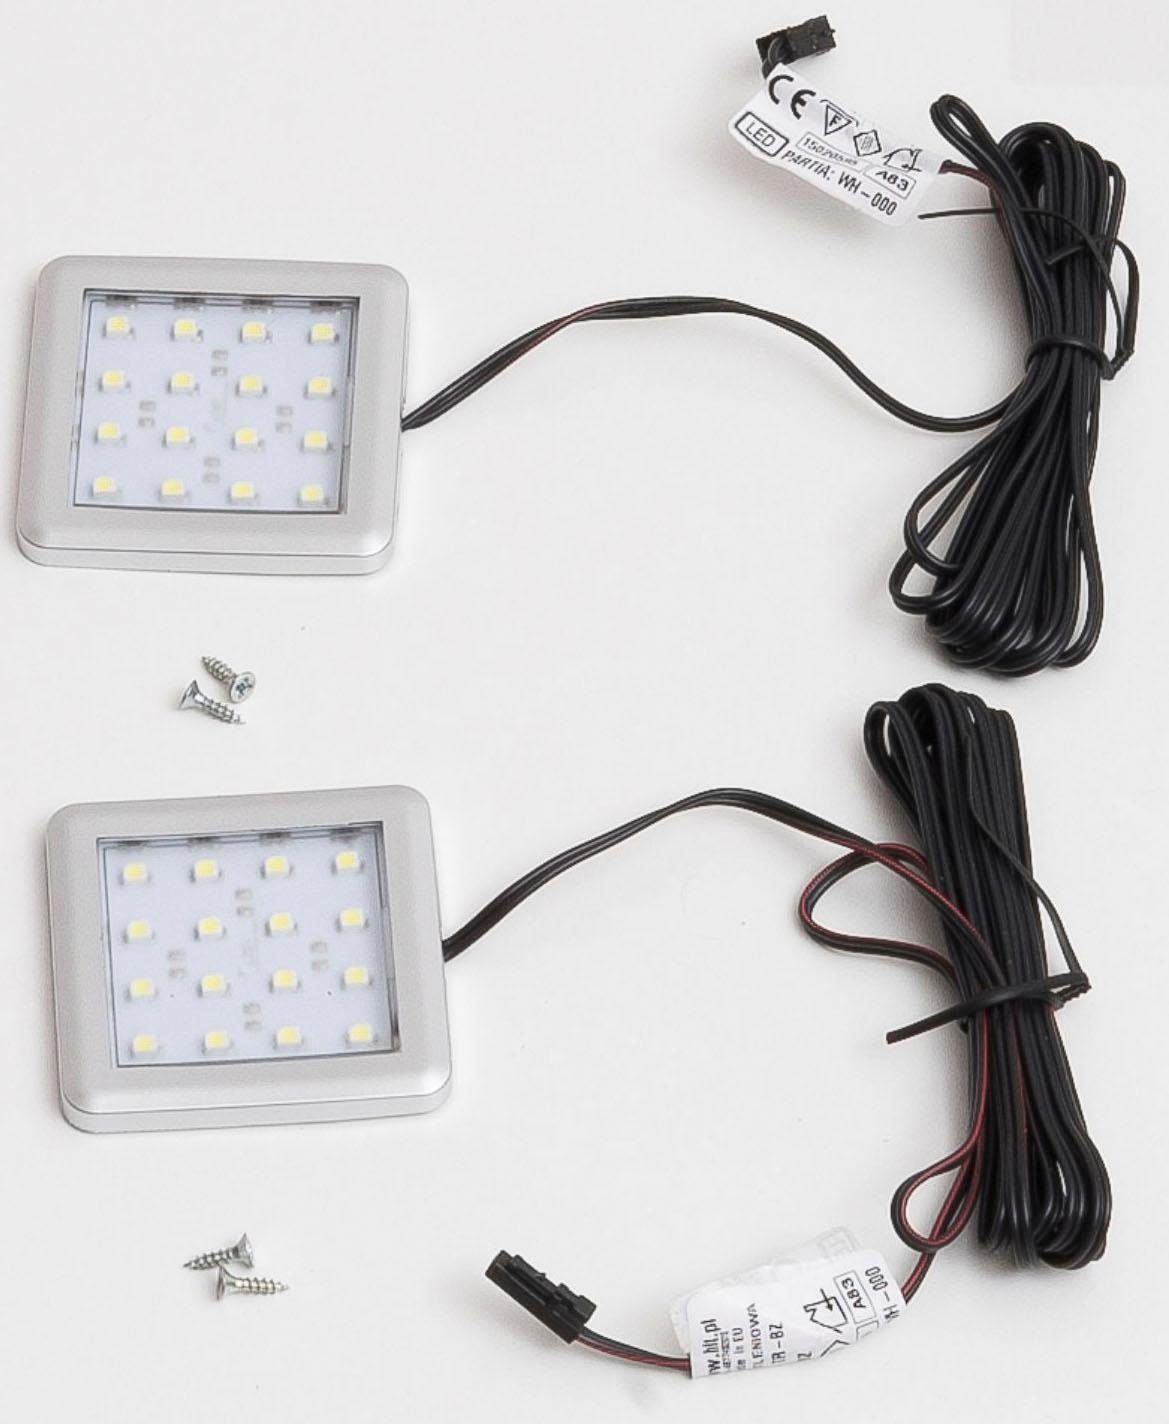 LED one set fest Musterring set integriert, by one by TACOMA, Musterring Einbauleuchte LED von